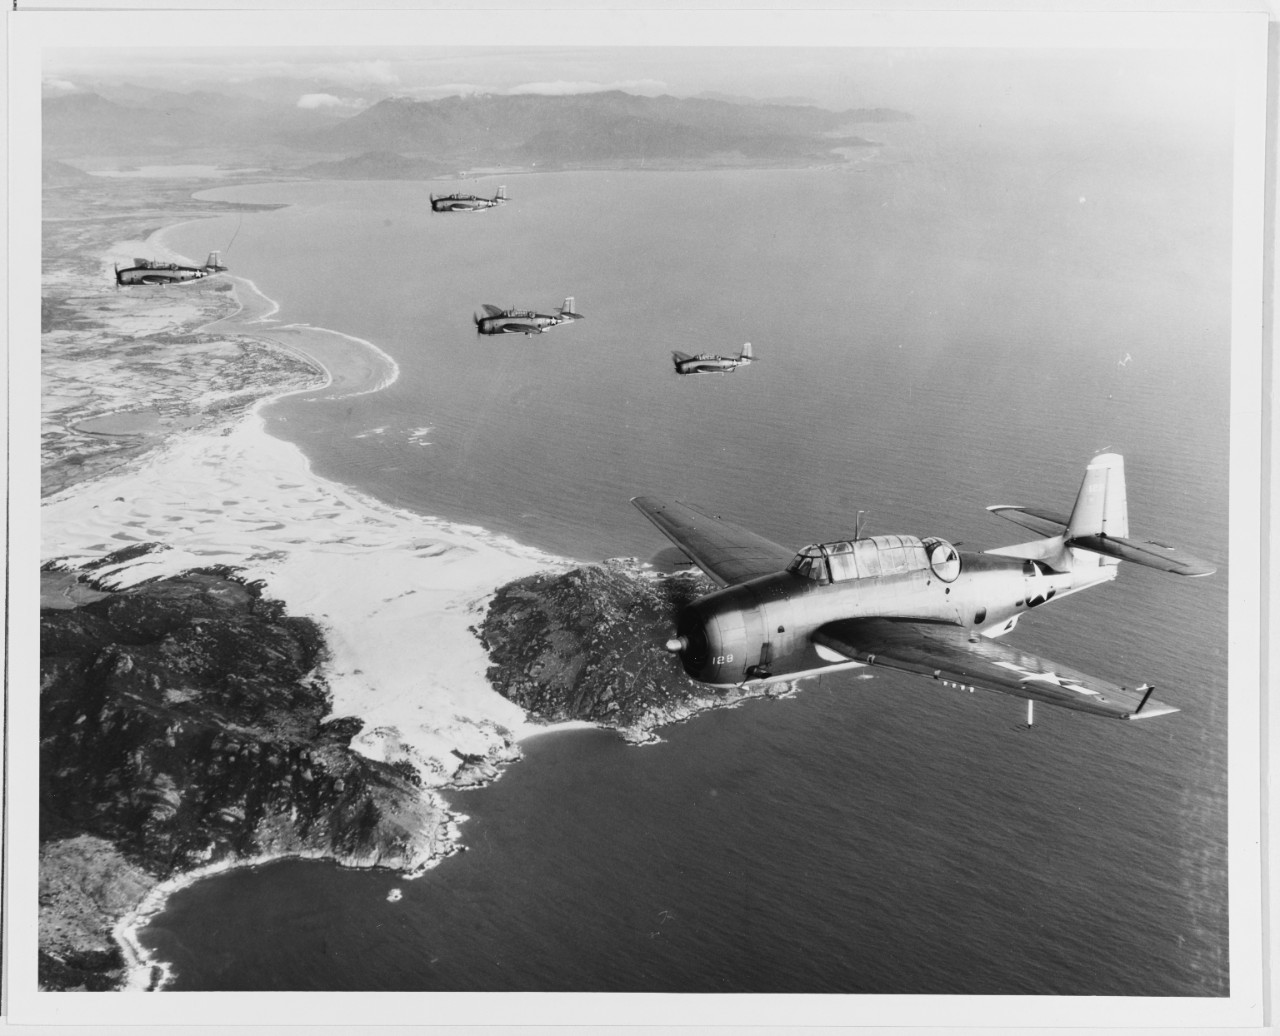 Formation of TBF Avenger Aircraft